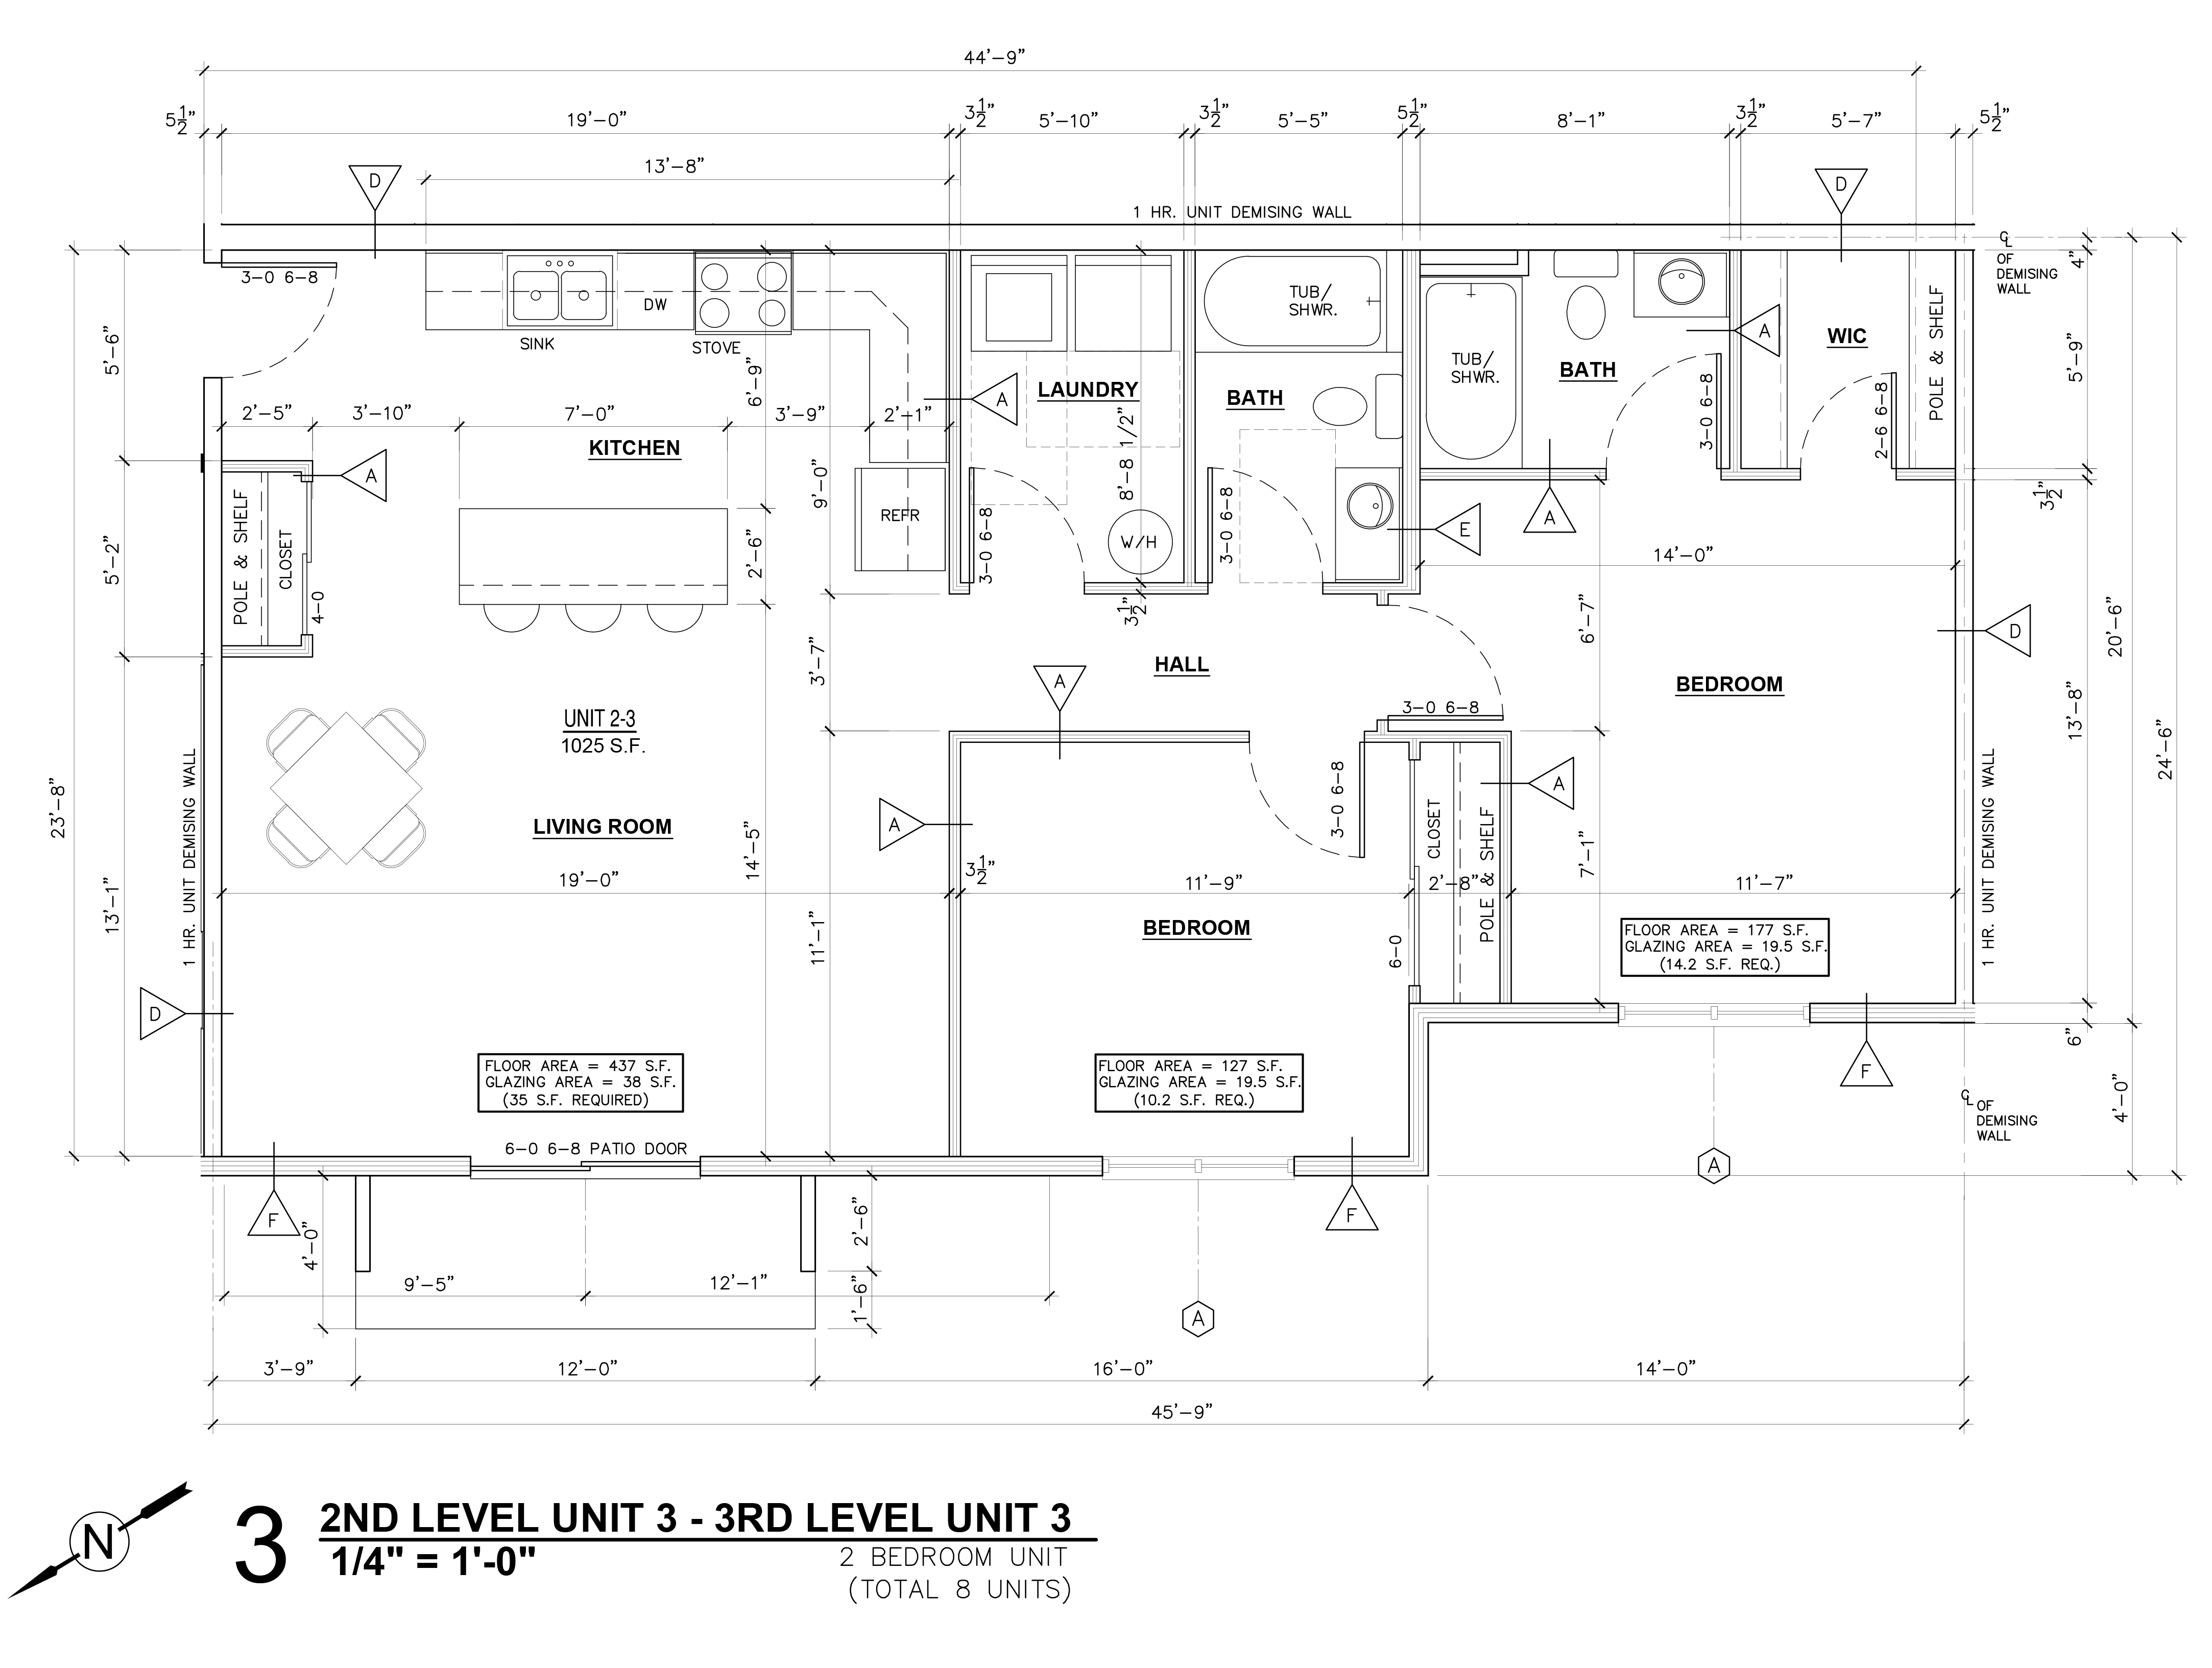 Hawks Nest Apartments 2nd and 3rd level unit 3 floor plan